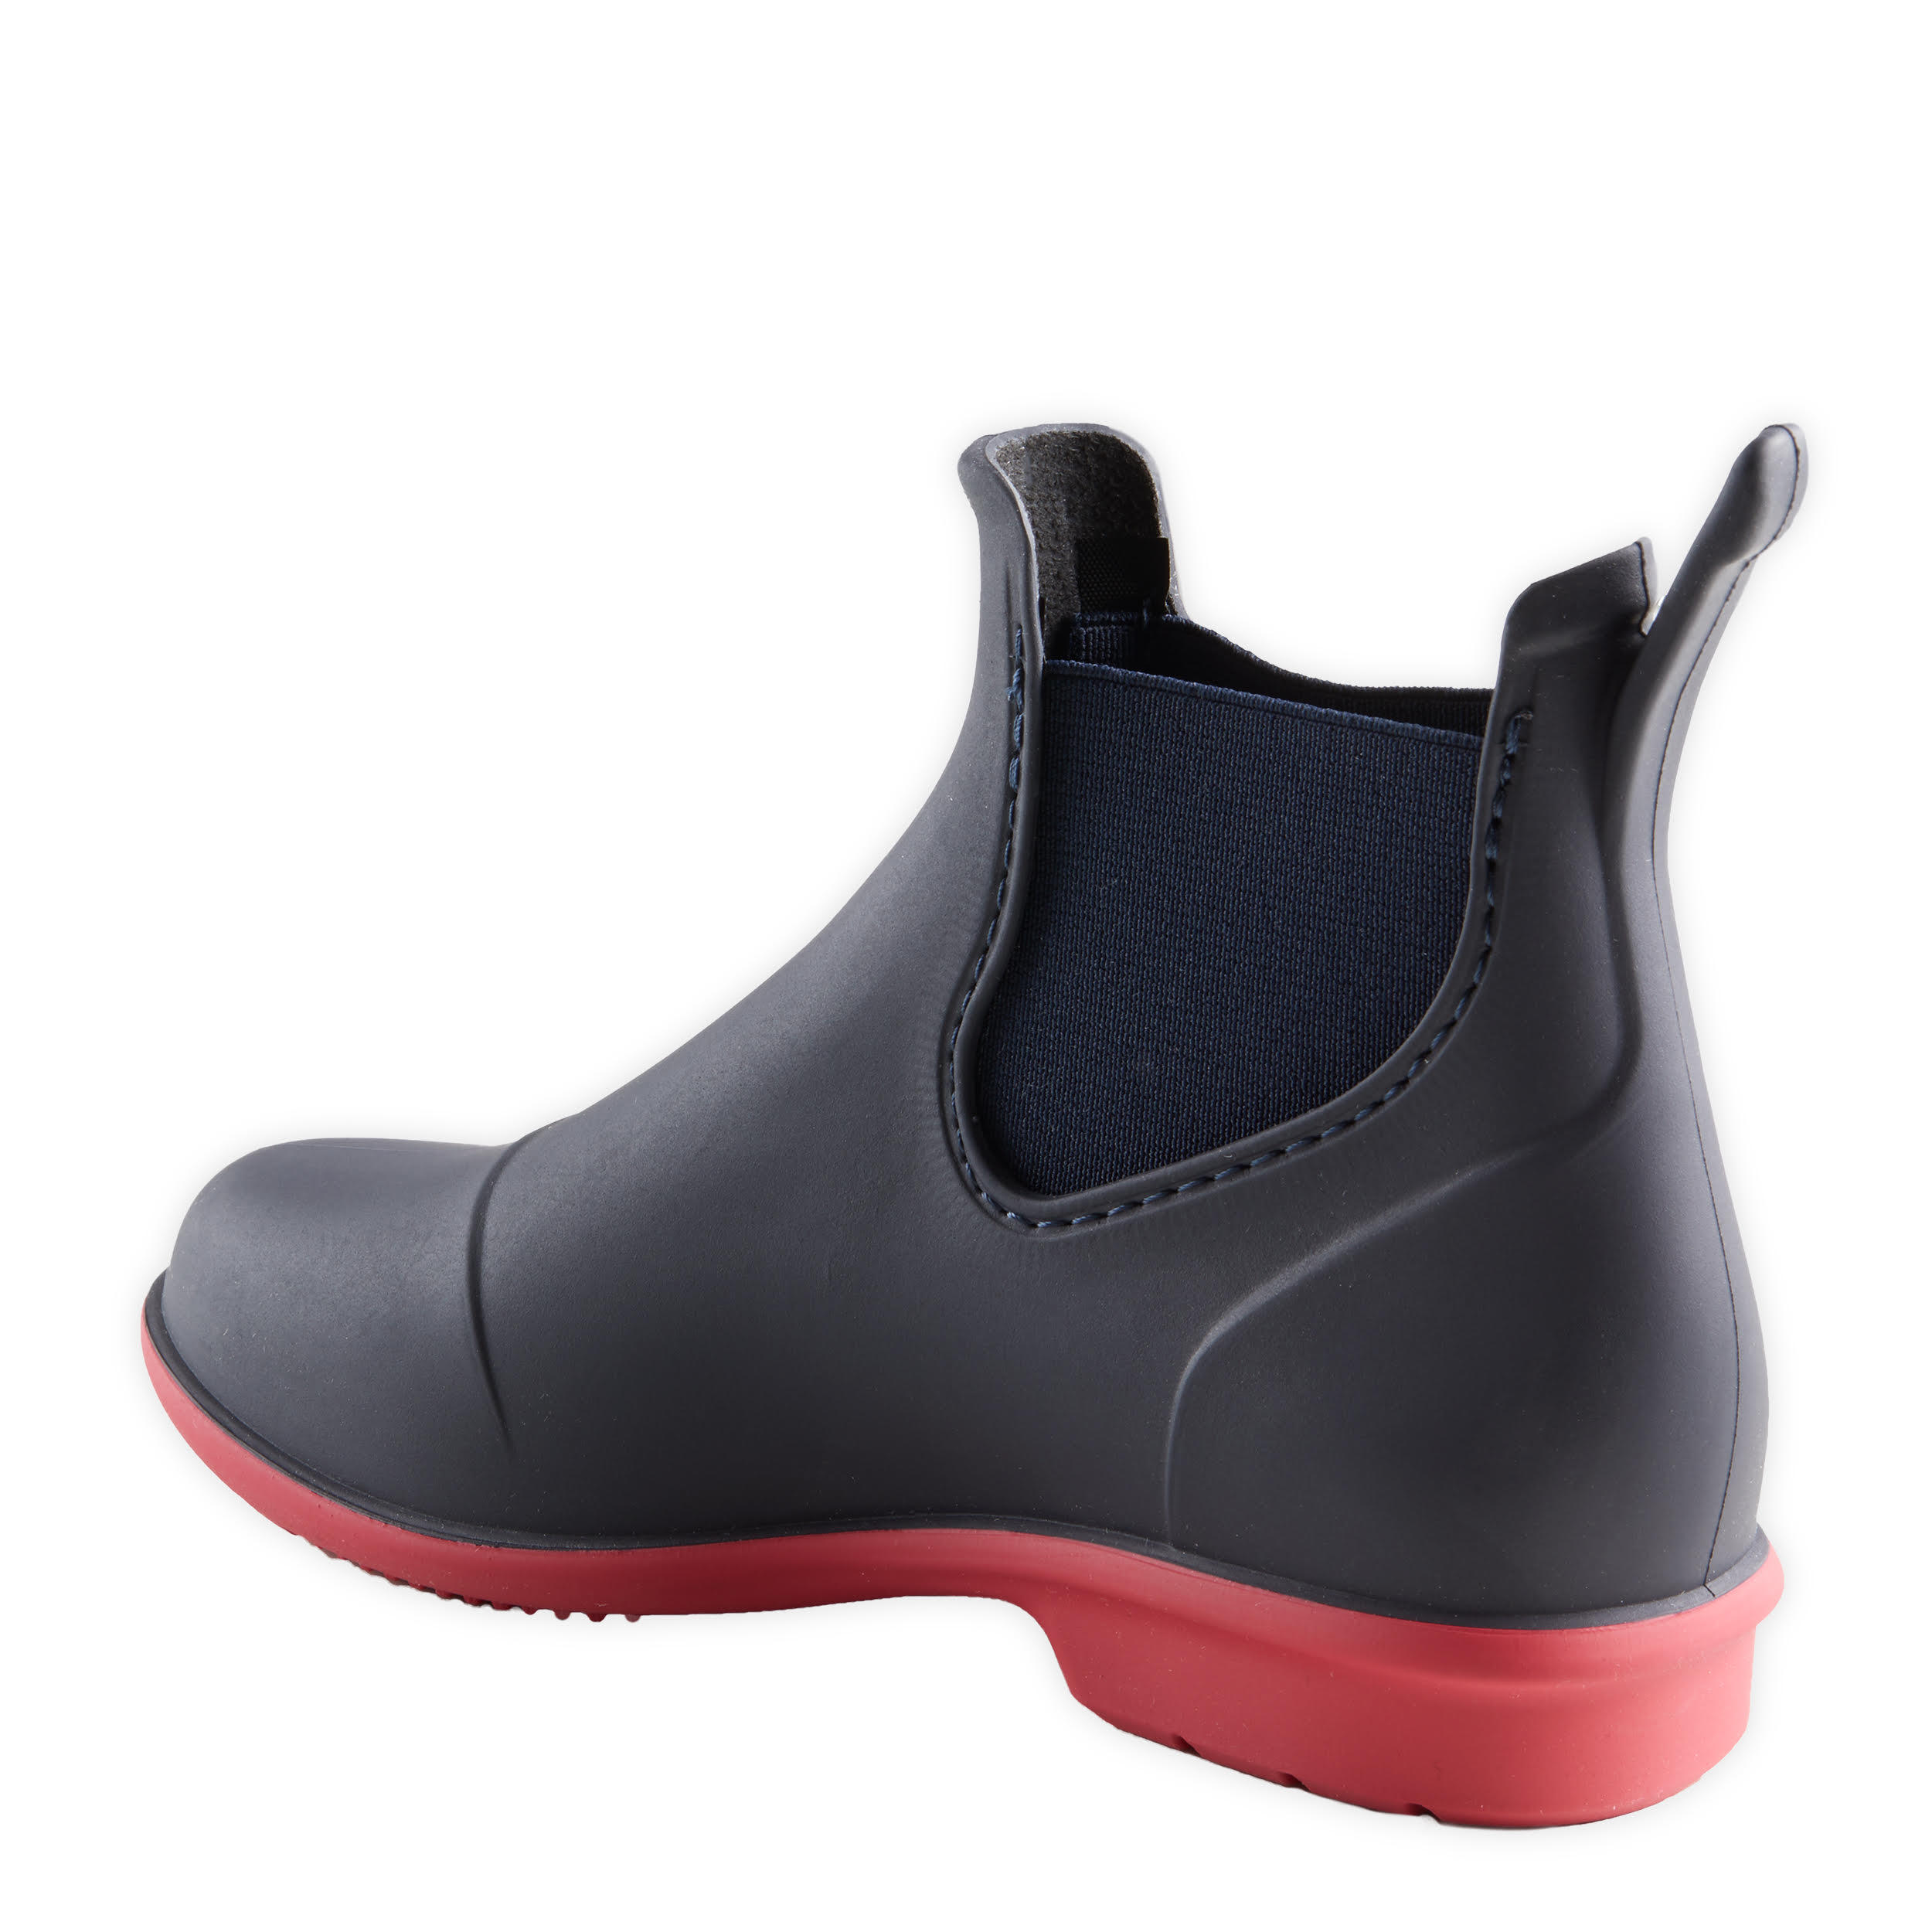 Kids' Horse Riding Boots 100 - Navy/Pink 3/8